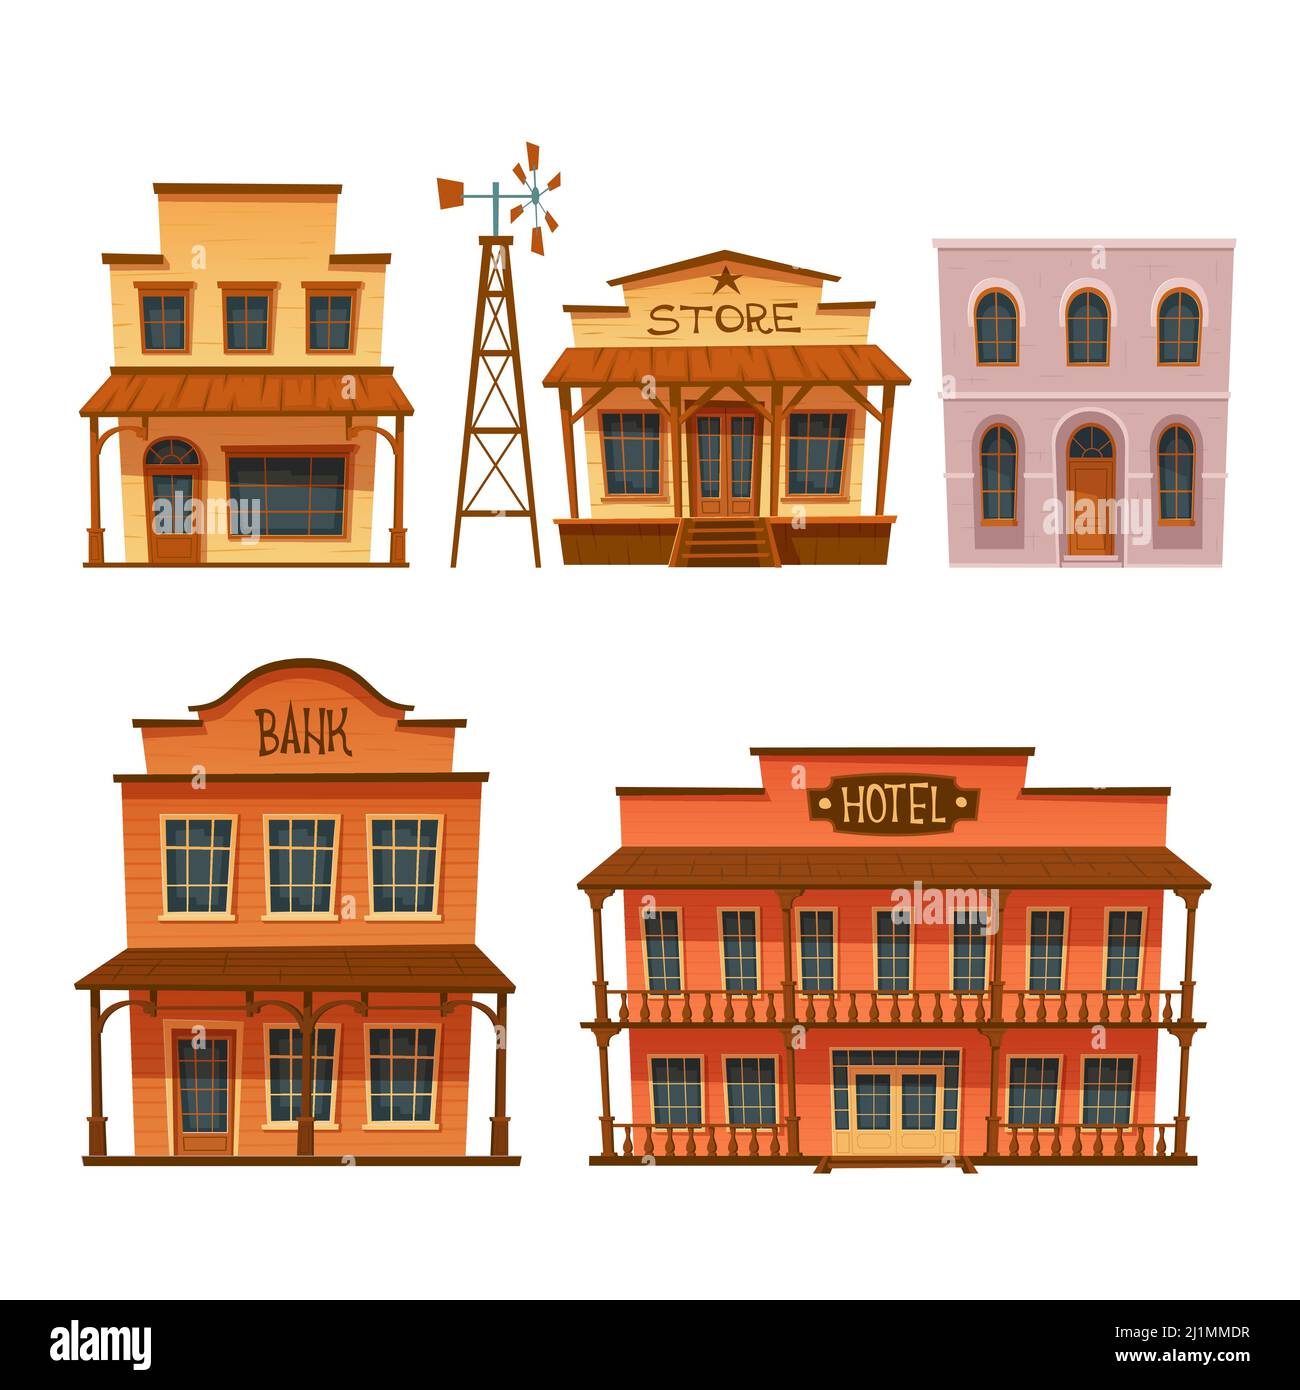 Wild west buildings set store, bank, hotel and weather vane tower. Wooden traditional western architecture isolated on white background. House exterio Stock Vector